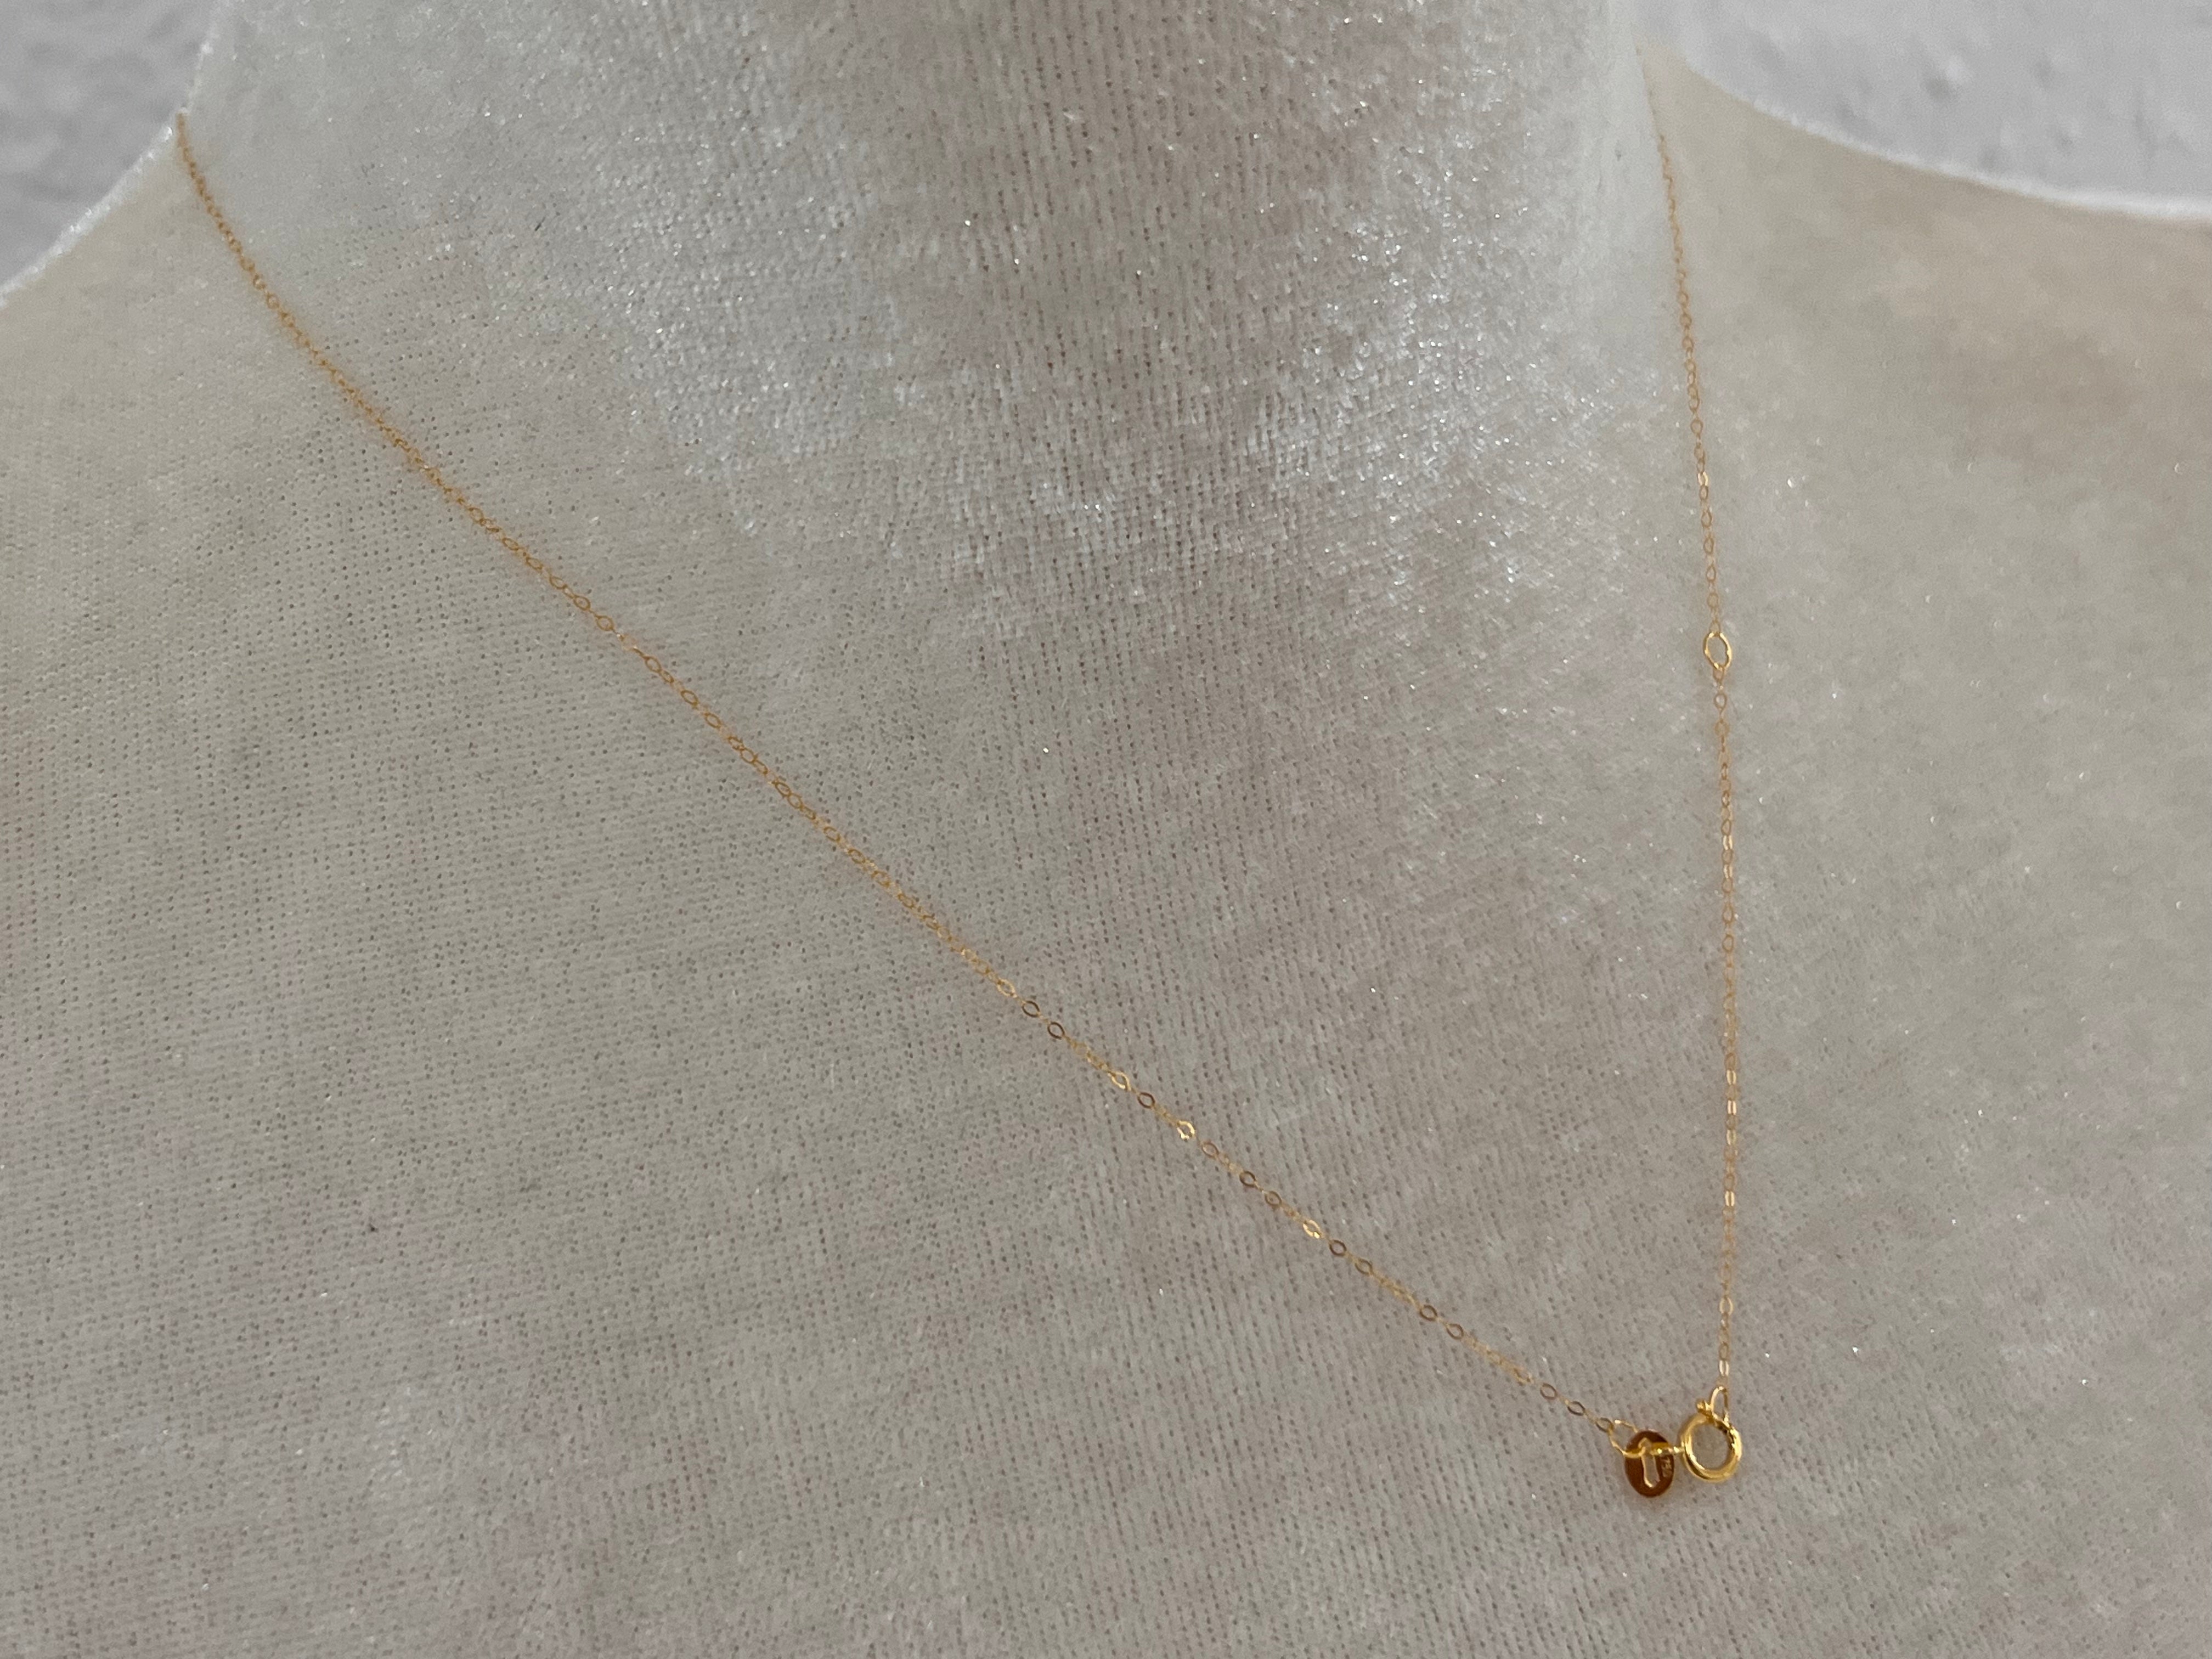 18k Gold Chain Dainty Adjustible length 18"